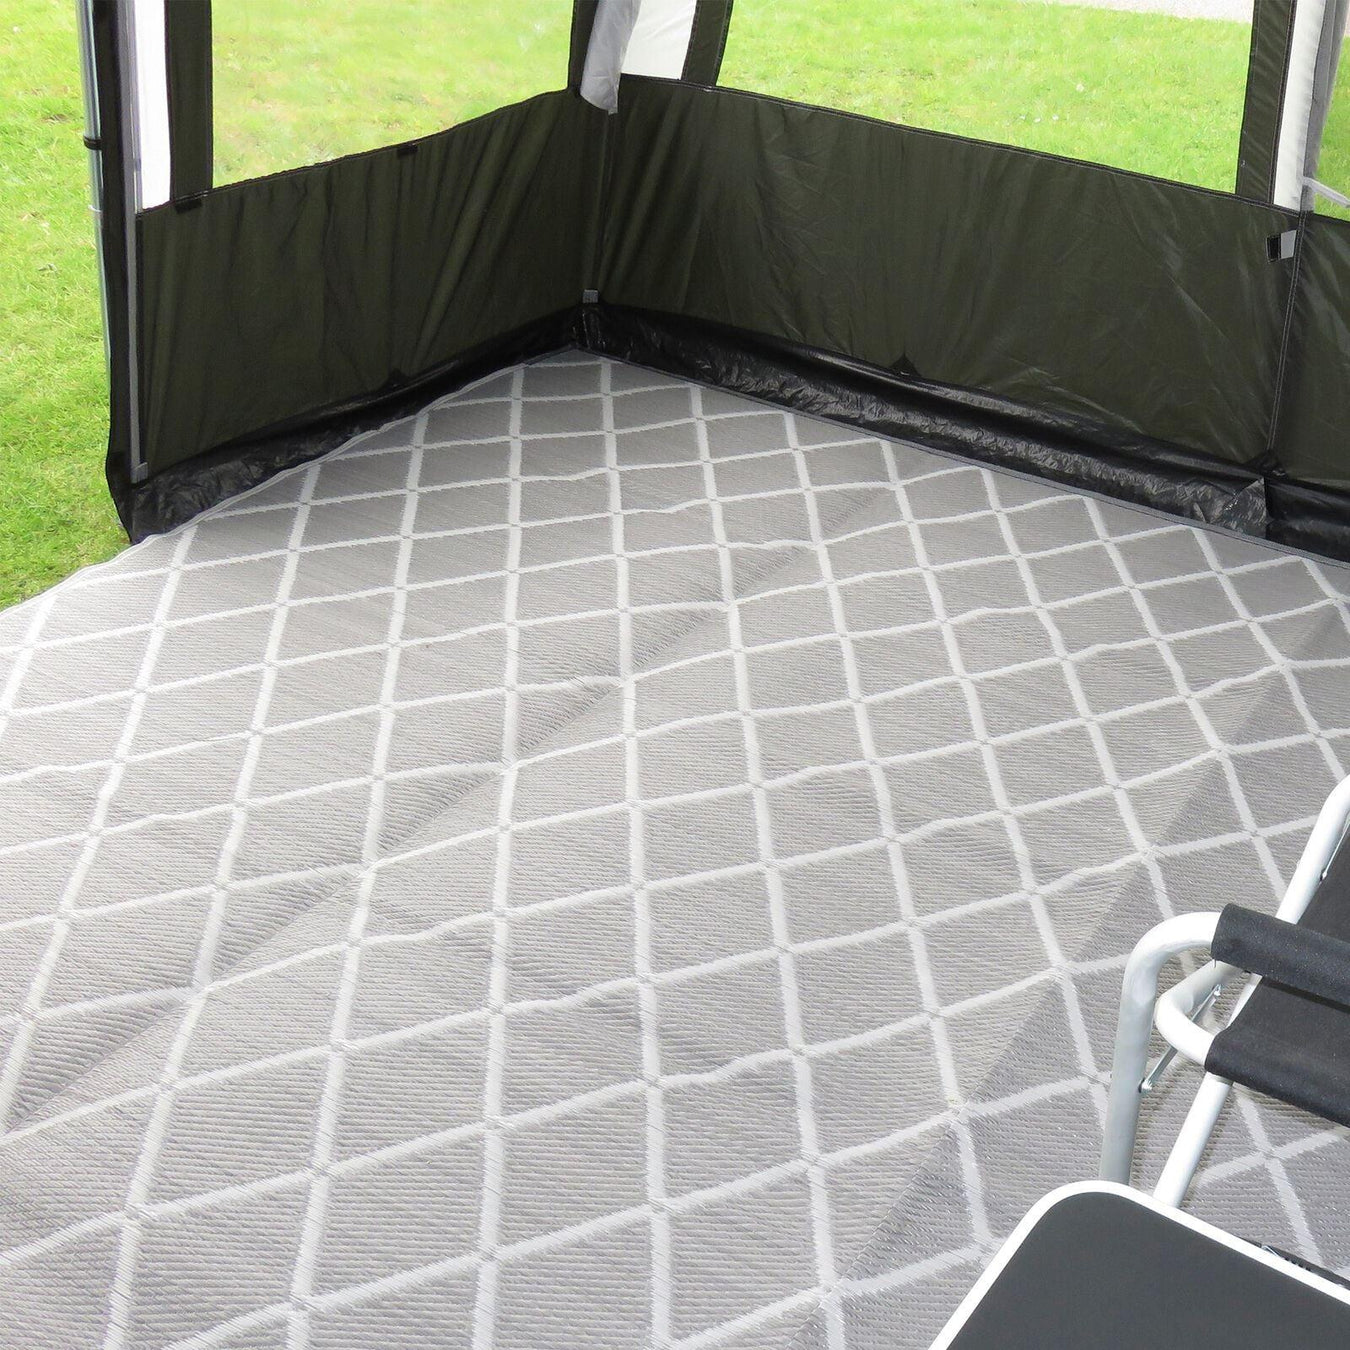 Awning Extras - UK Camping And Leisure